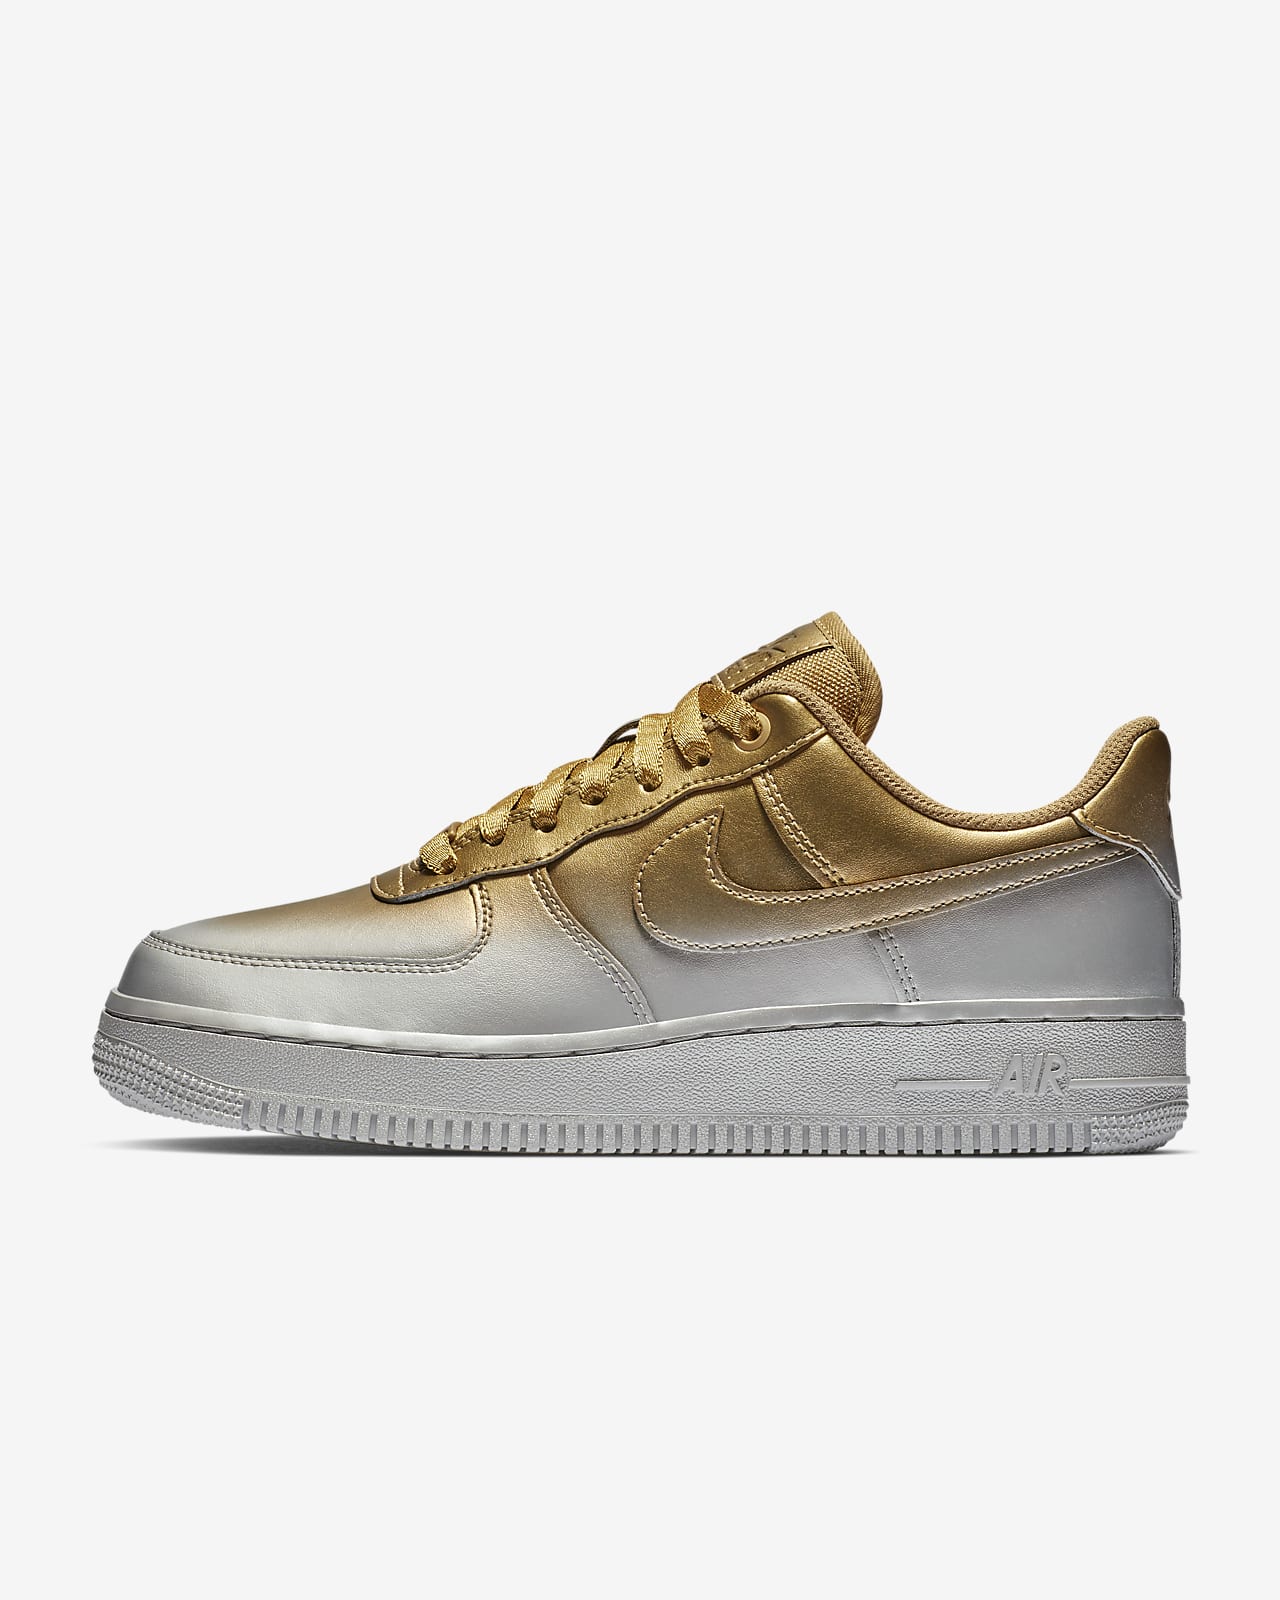 nike air force 1 07 lux shoe